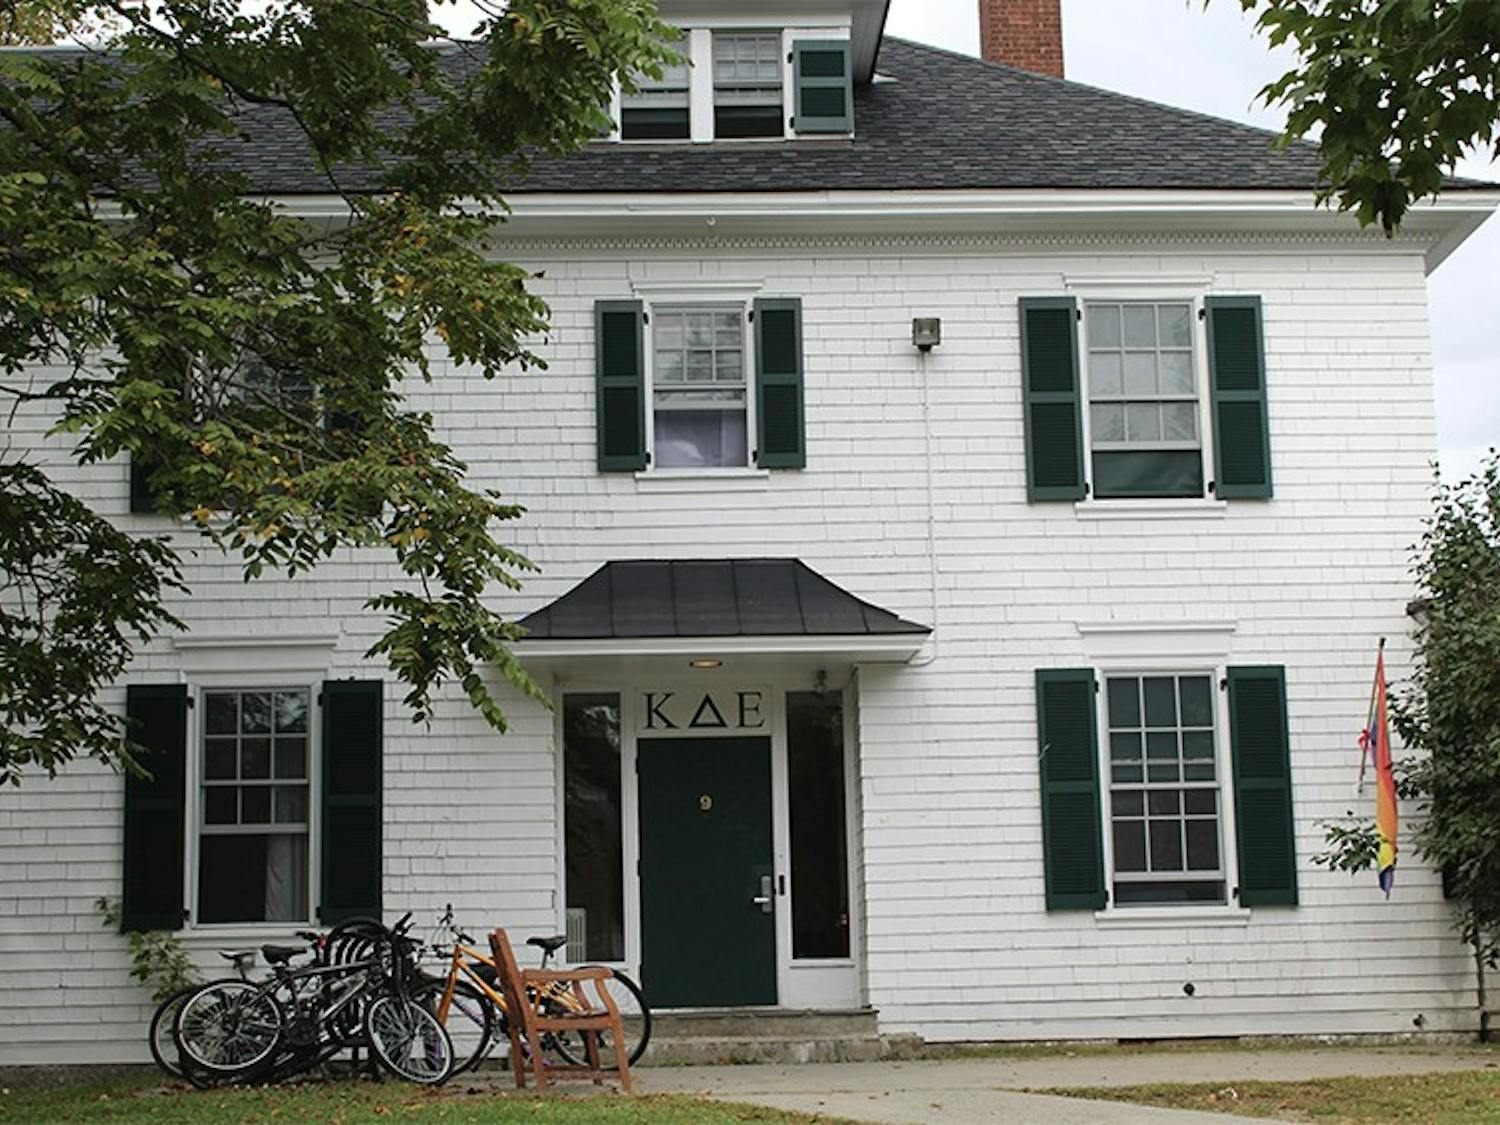 Kappa Delta Epsilon sorority was broken into in the spring. The investigation is still open, but all leads have been exhausted.